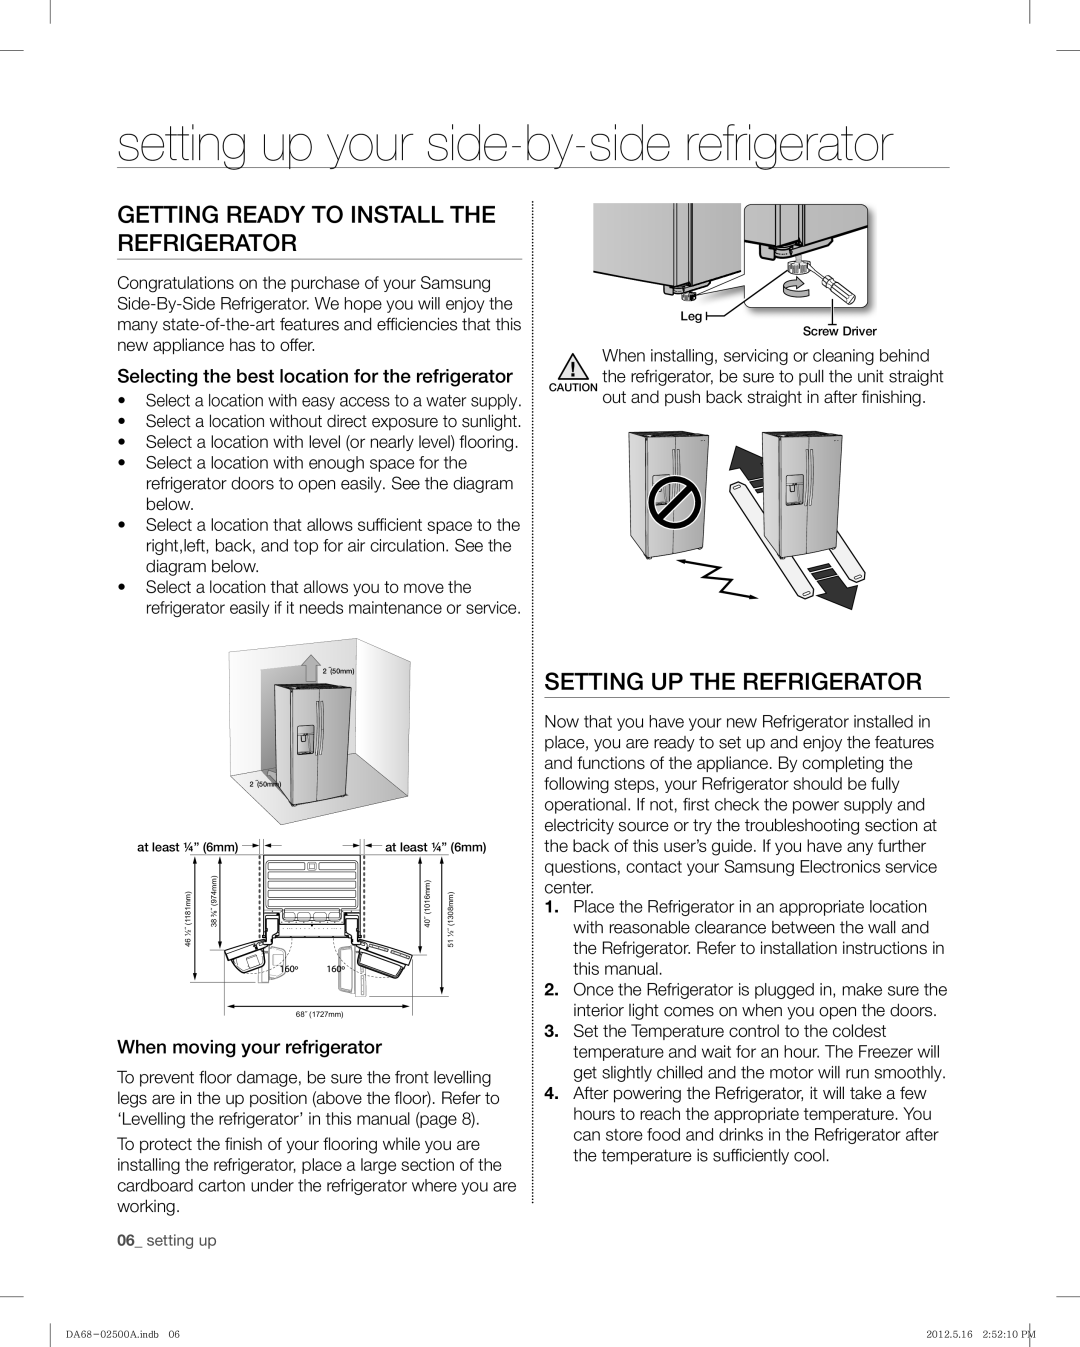 Samsung RSG307AAWP, RSG307AABP Setting up your side-by-side refrigerator, Getting Ready to Install the Refrigerator 